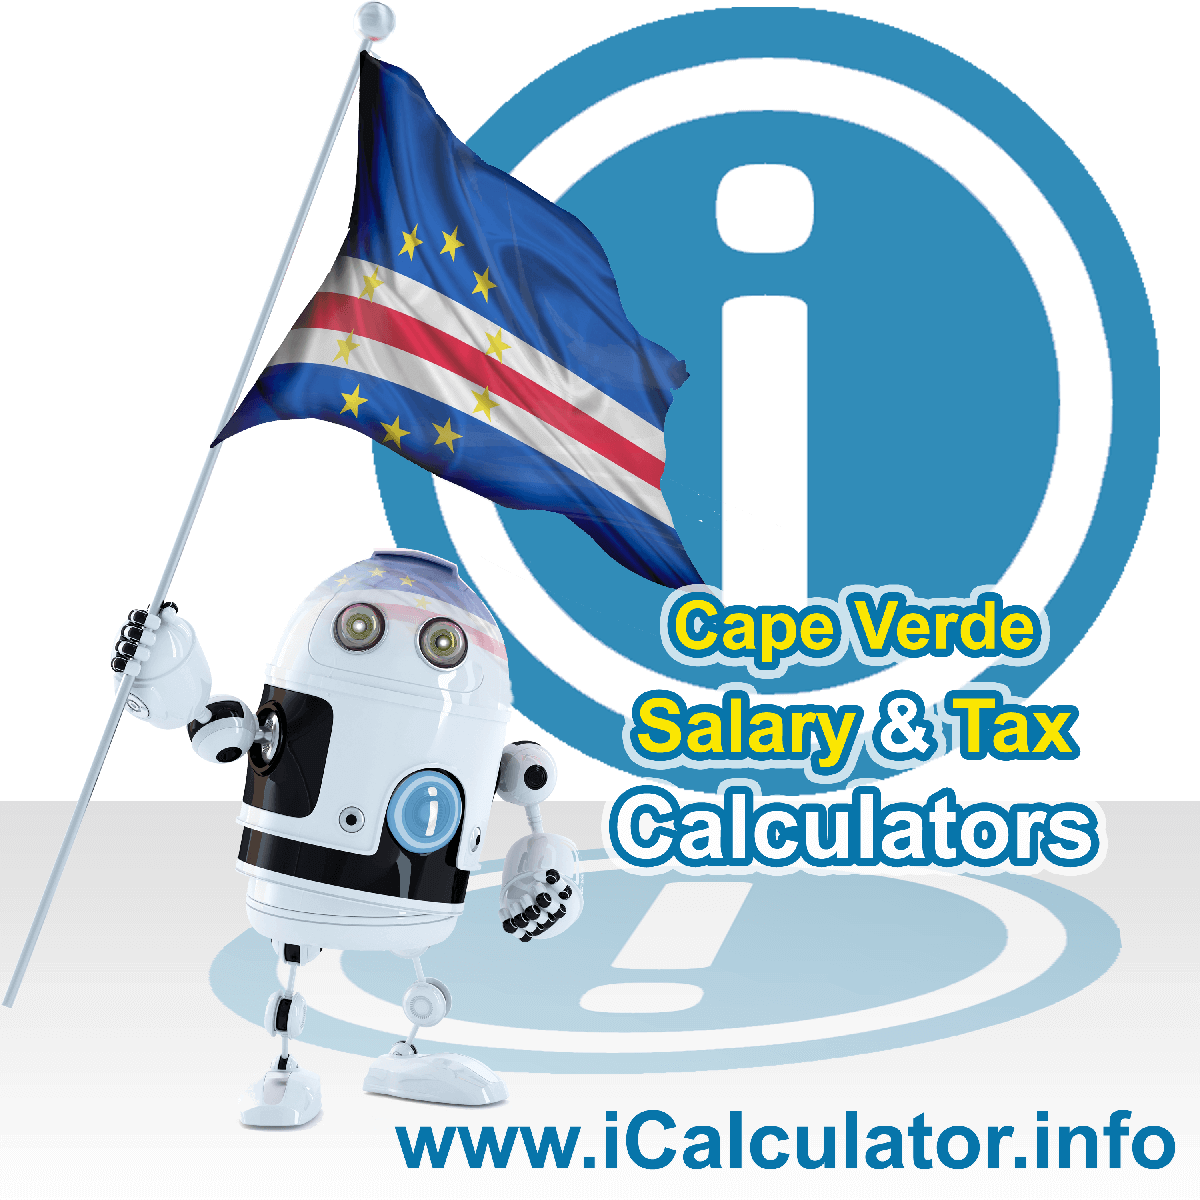 Cape Verde Wage Calculator. This image shows the Cape Verde flag and information relating to the tax formula for the Cape Verde Tax Calculator